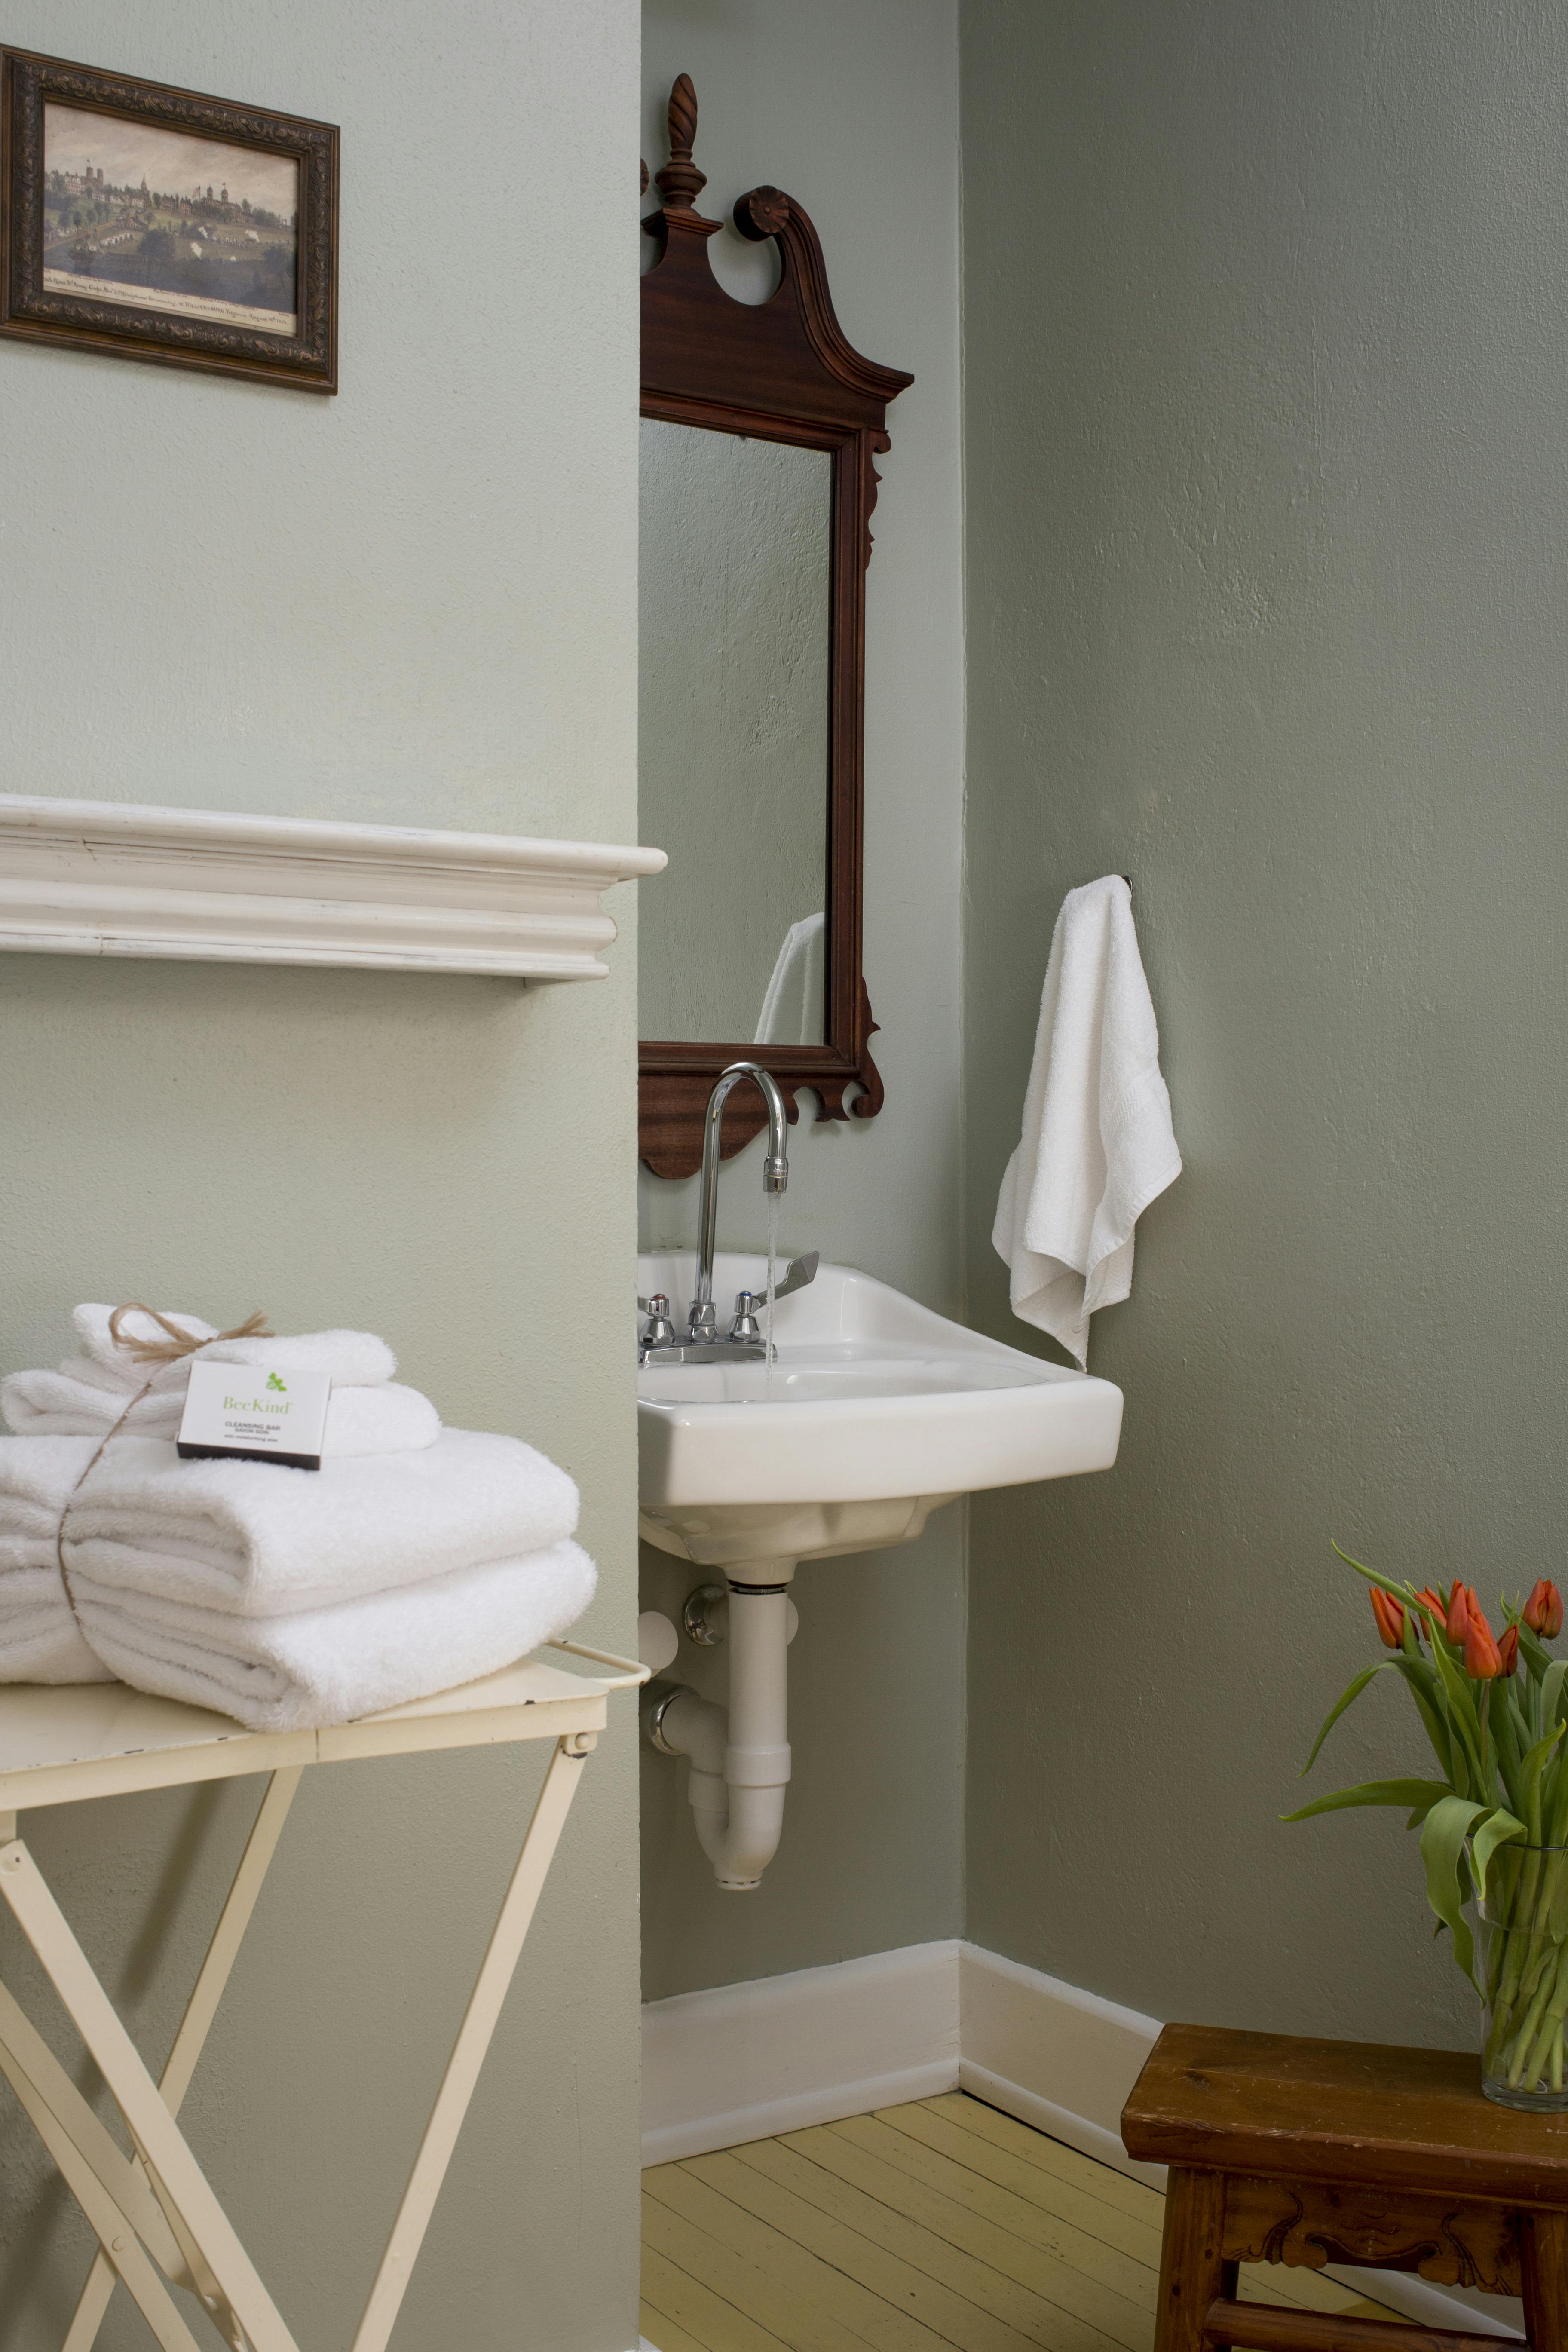 Wall-mounted sink with white plush towels on stand nearby, beautifully framed mirror above